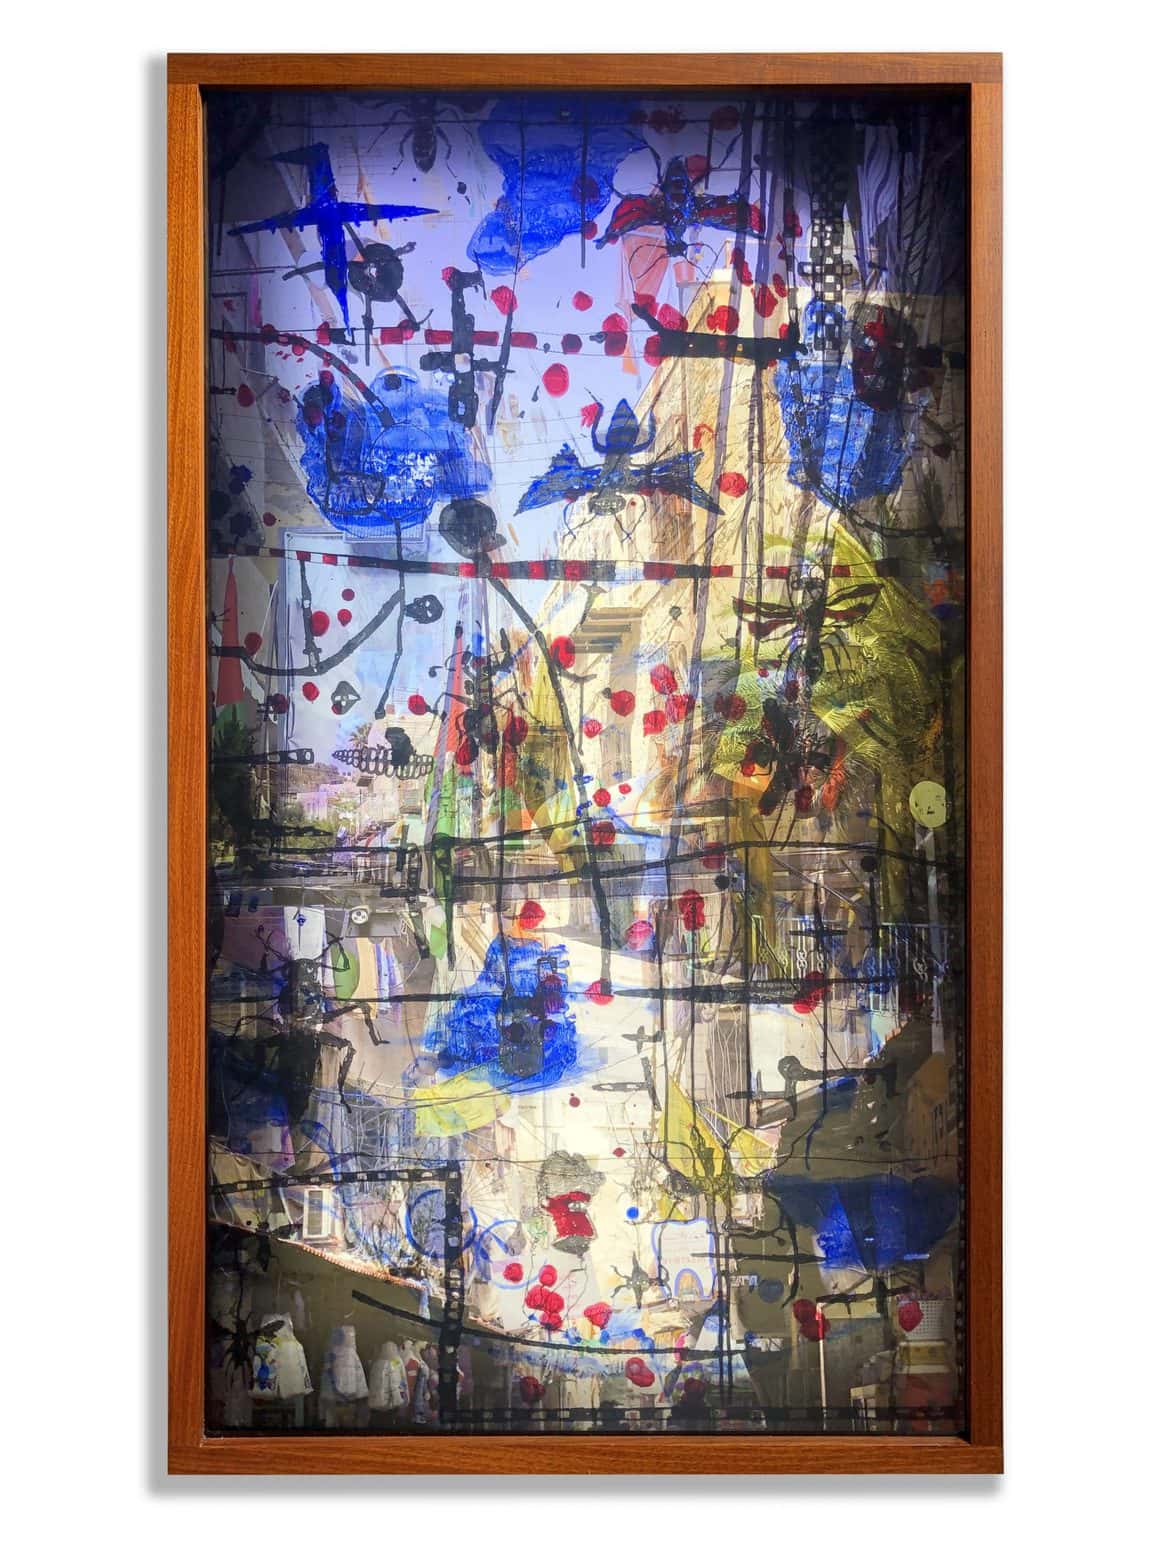 ‘Shuhada Street’, 2020, mixed media on translucent film with face-mounted photographic image on acrylic in framed light box, 140 x 80 x 11 cm